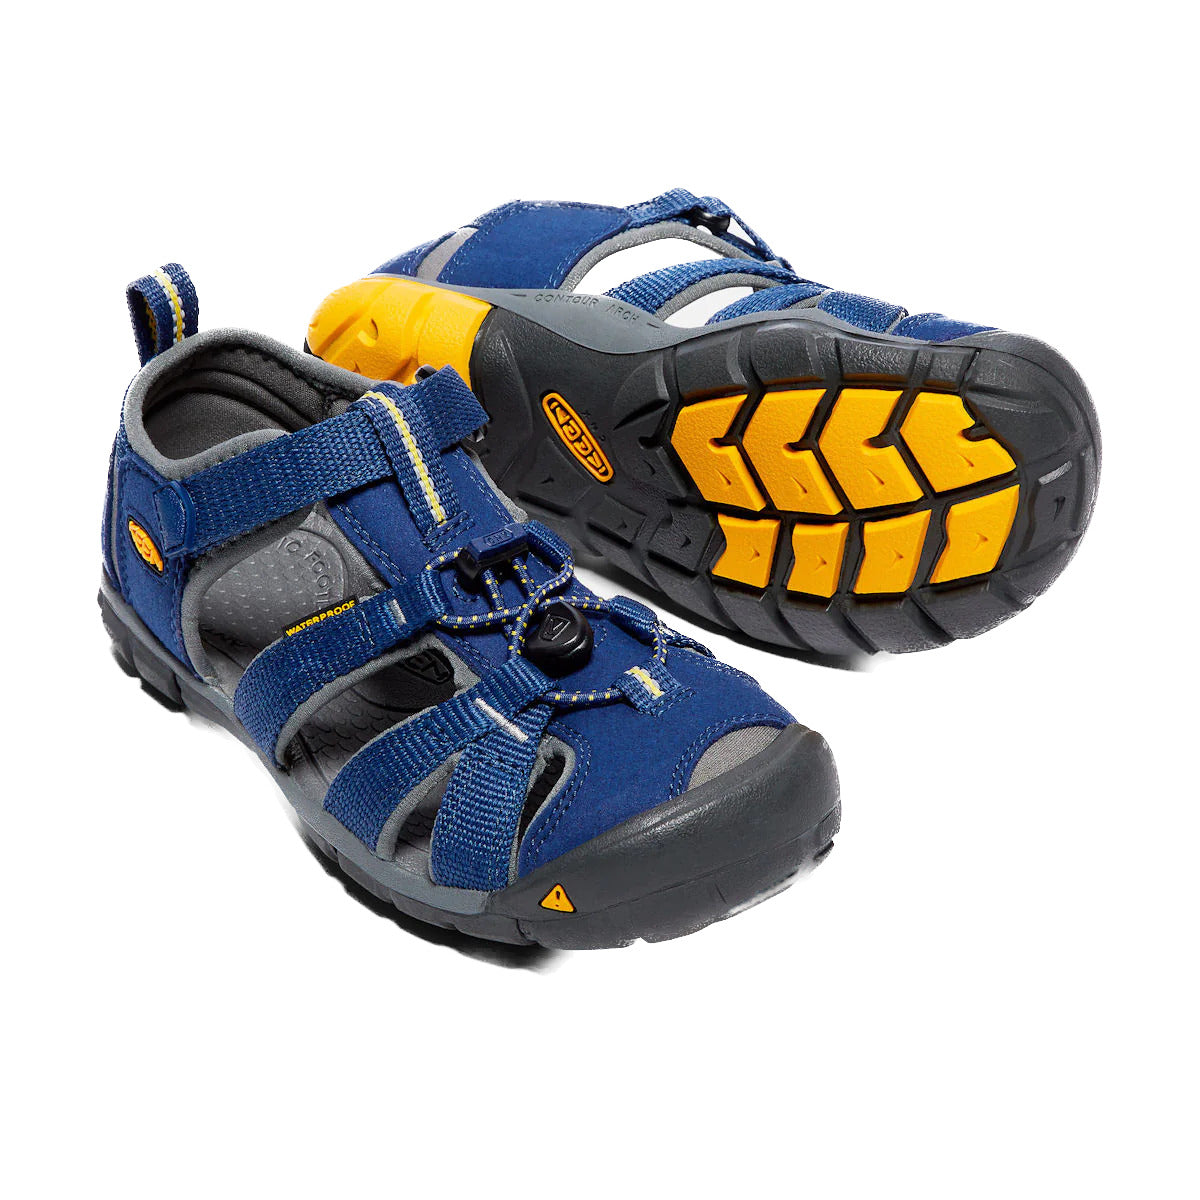 Keen Youth Seacamp 2 CNX Sandals